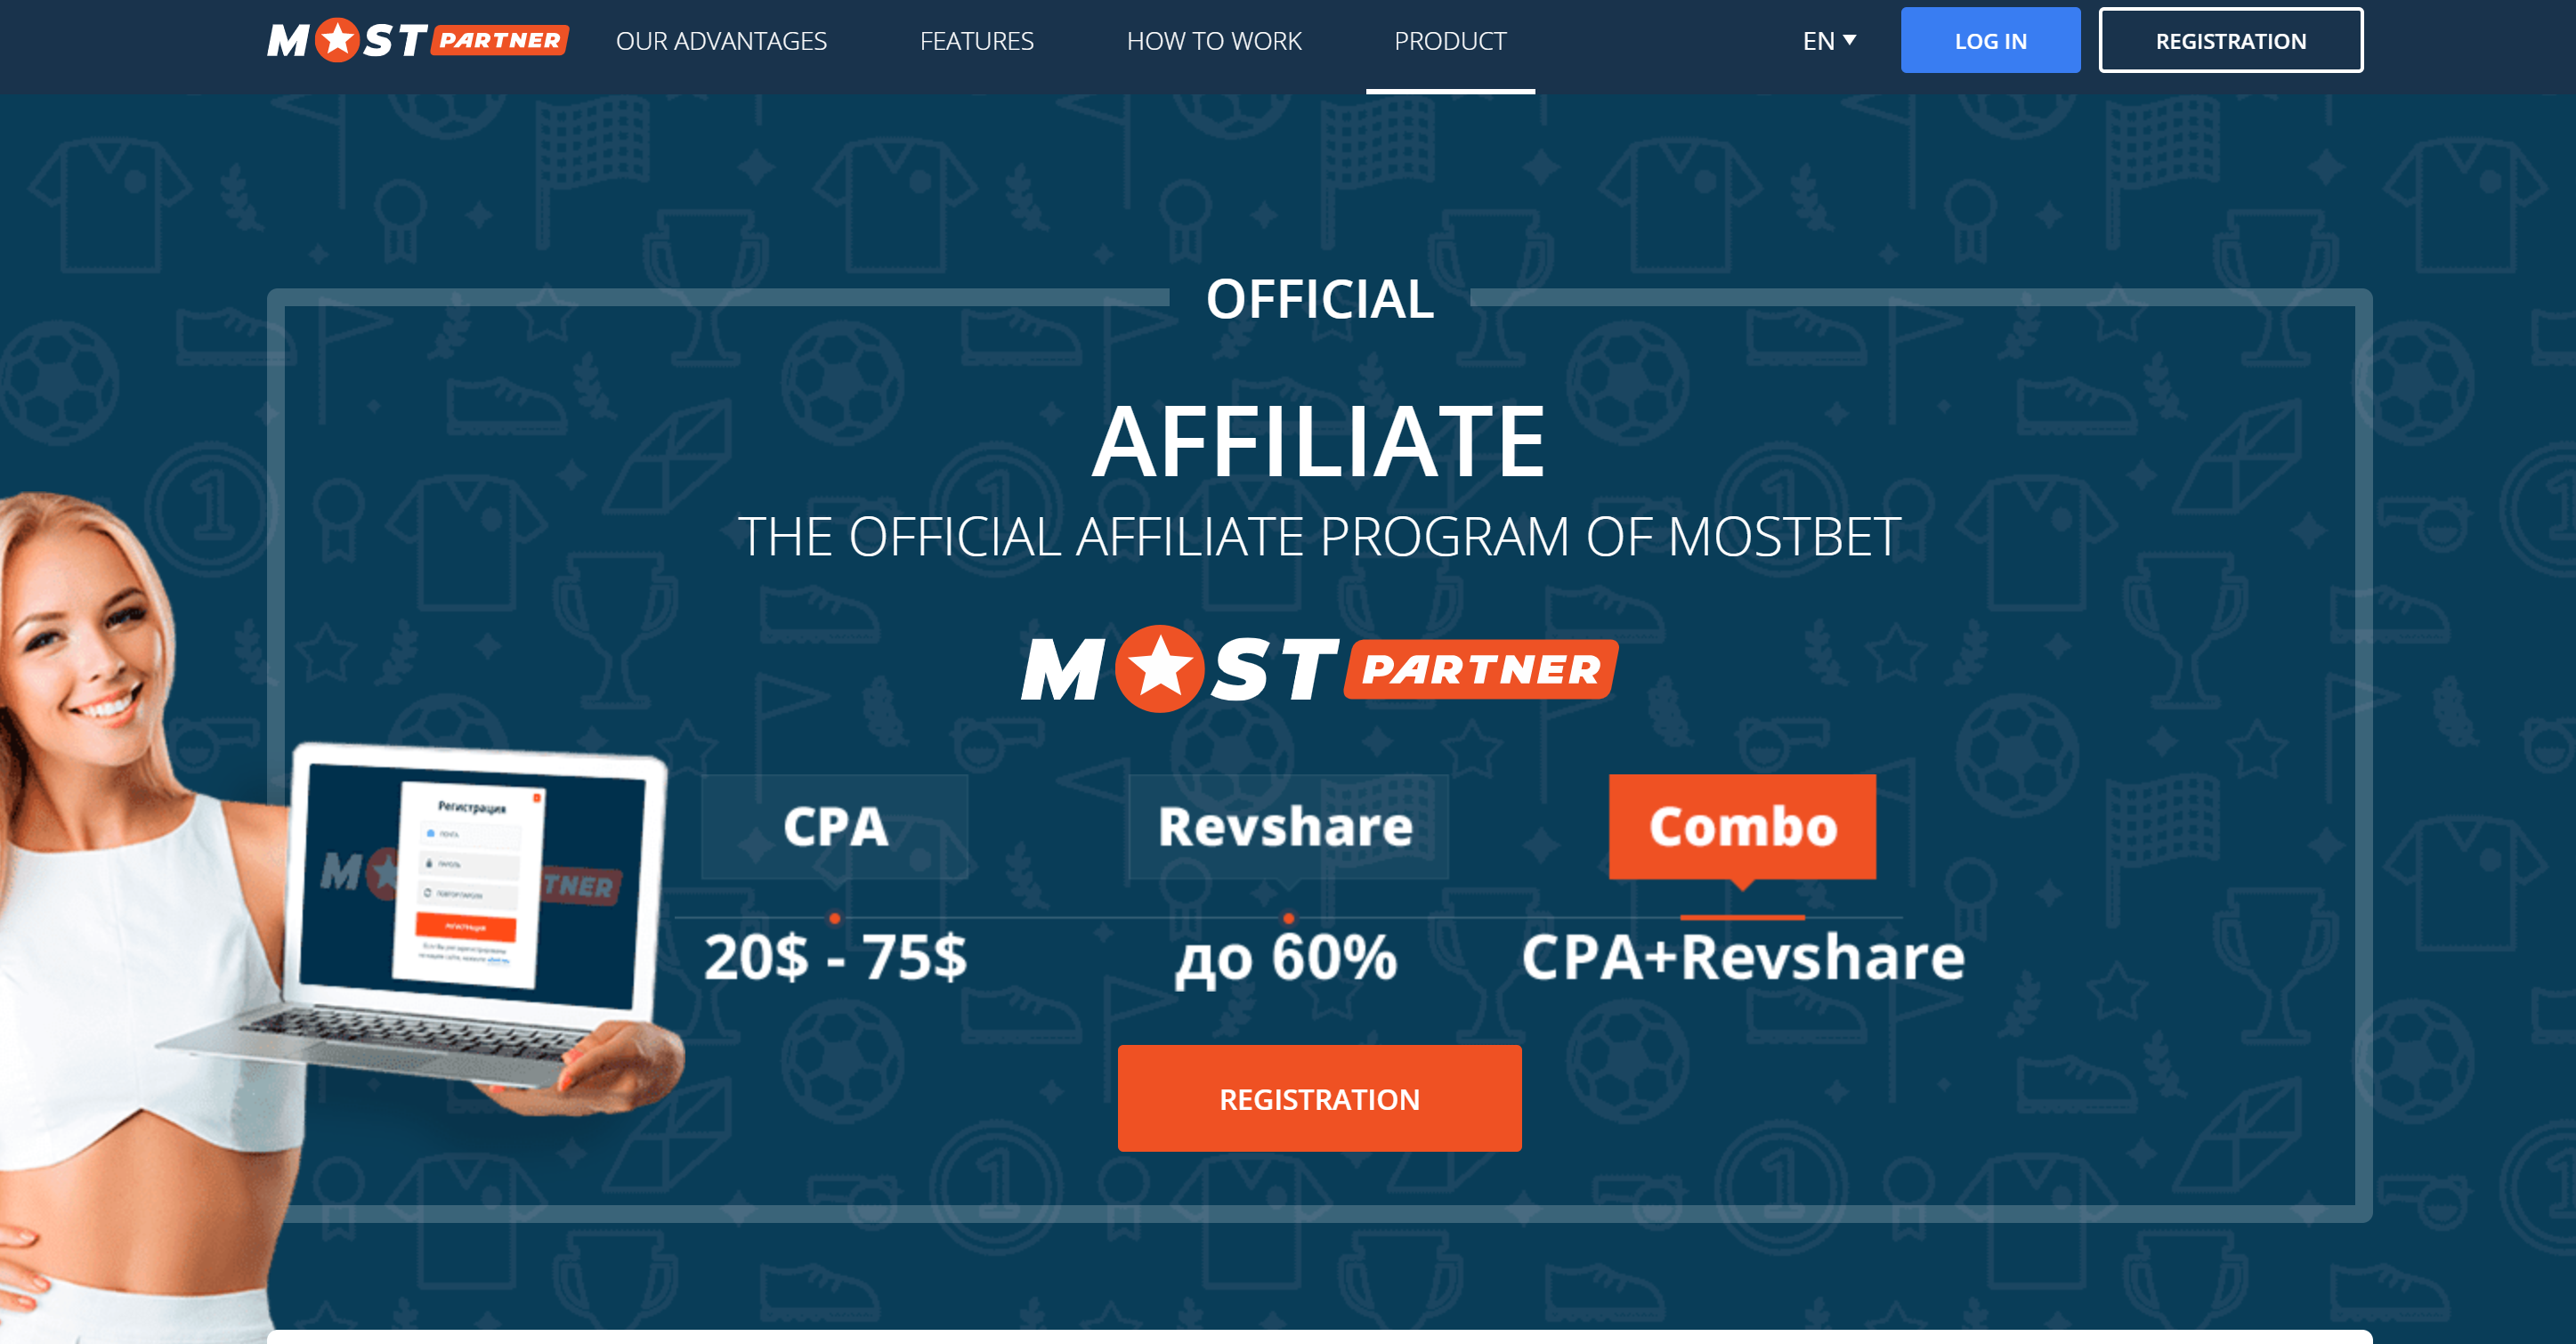 Mastering The Way Of Mostbet AZ 90 Bookmaker and Casino in Azerbaijan Is Not An Accident - It's An Art